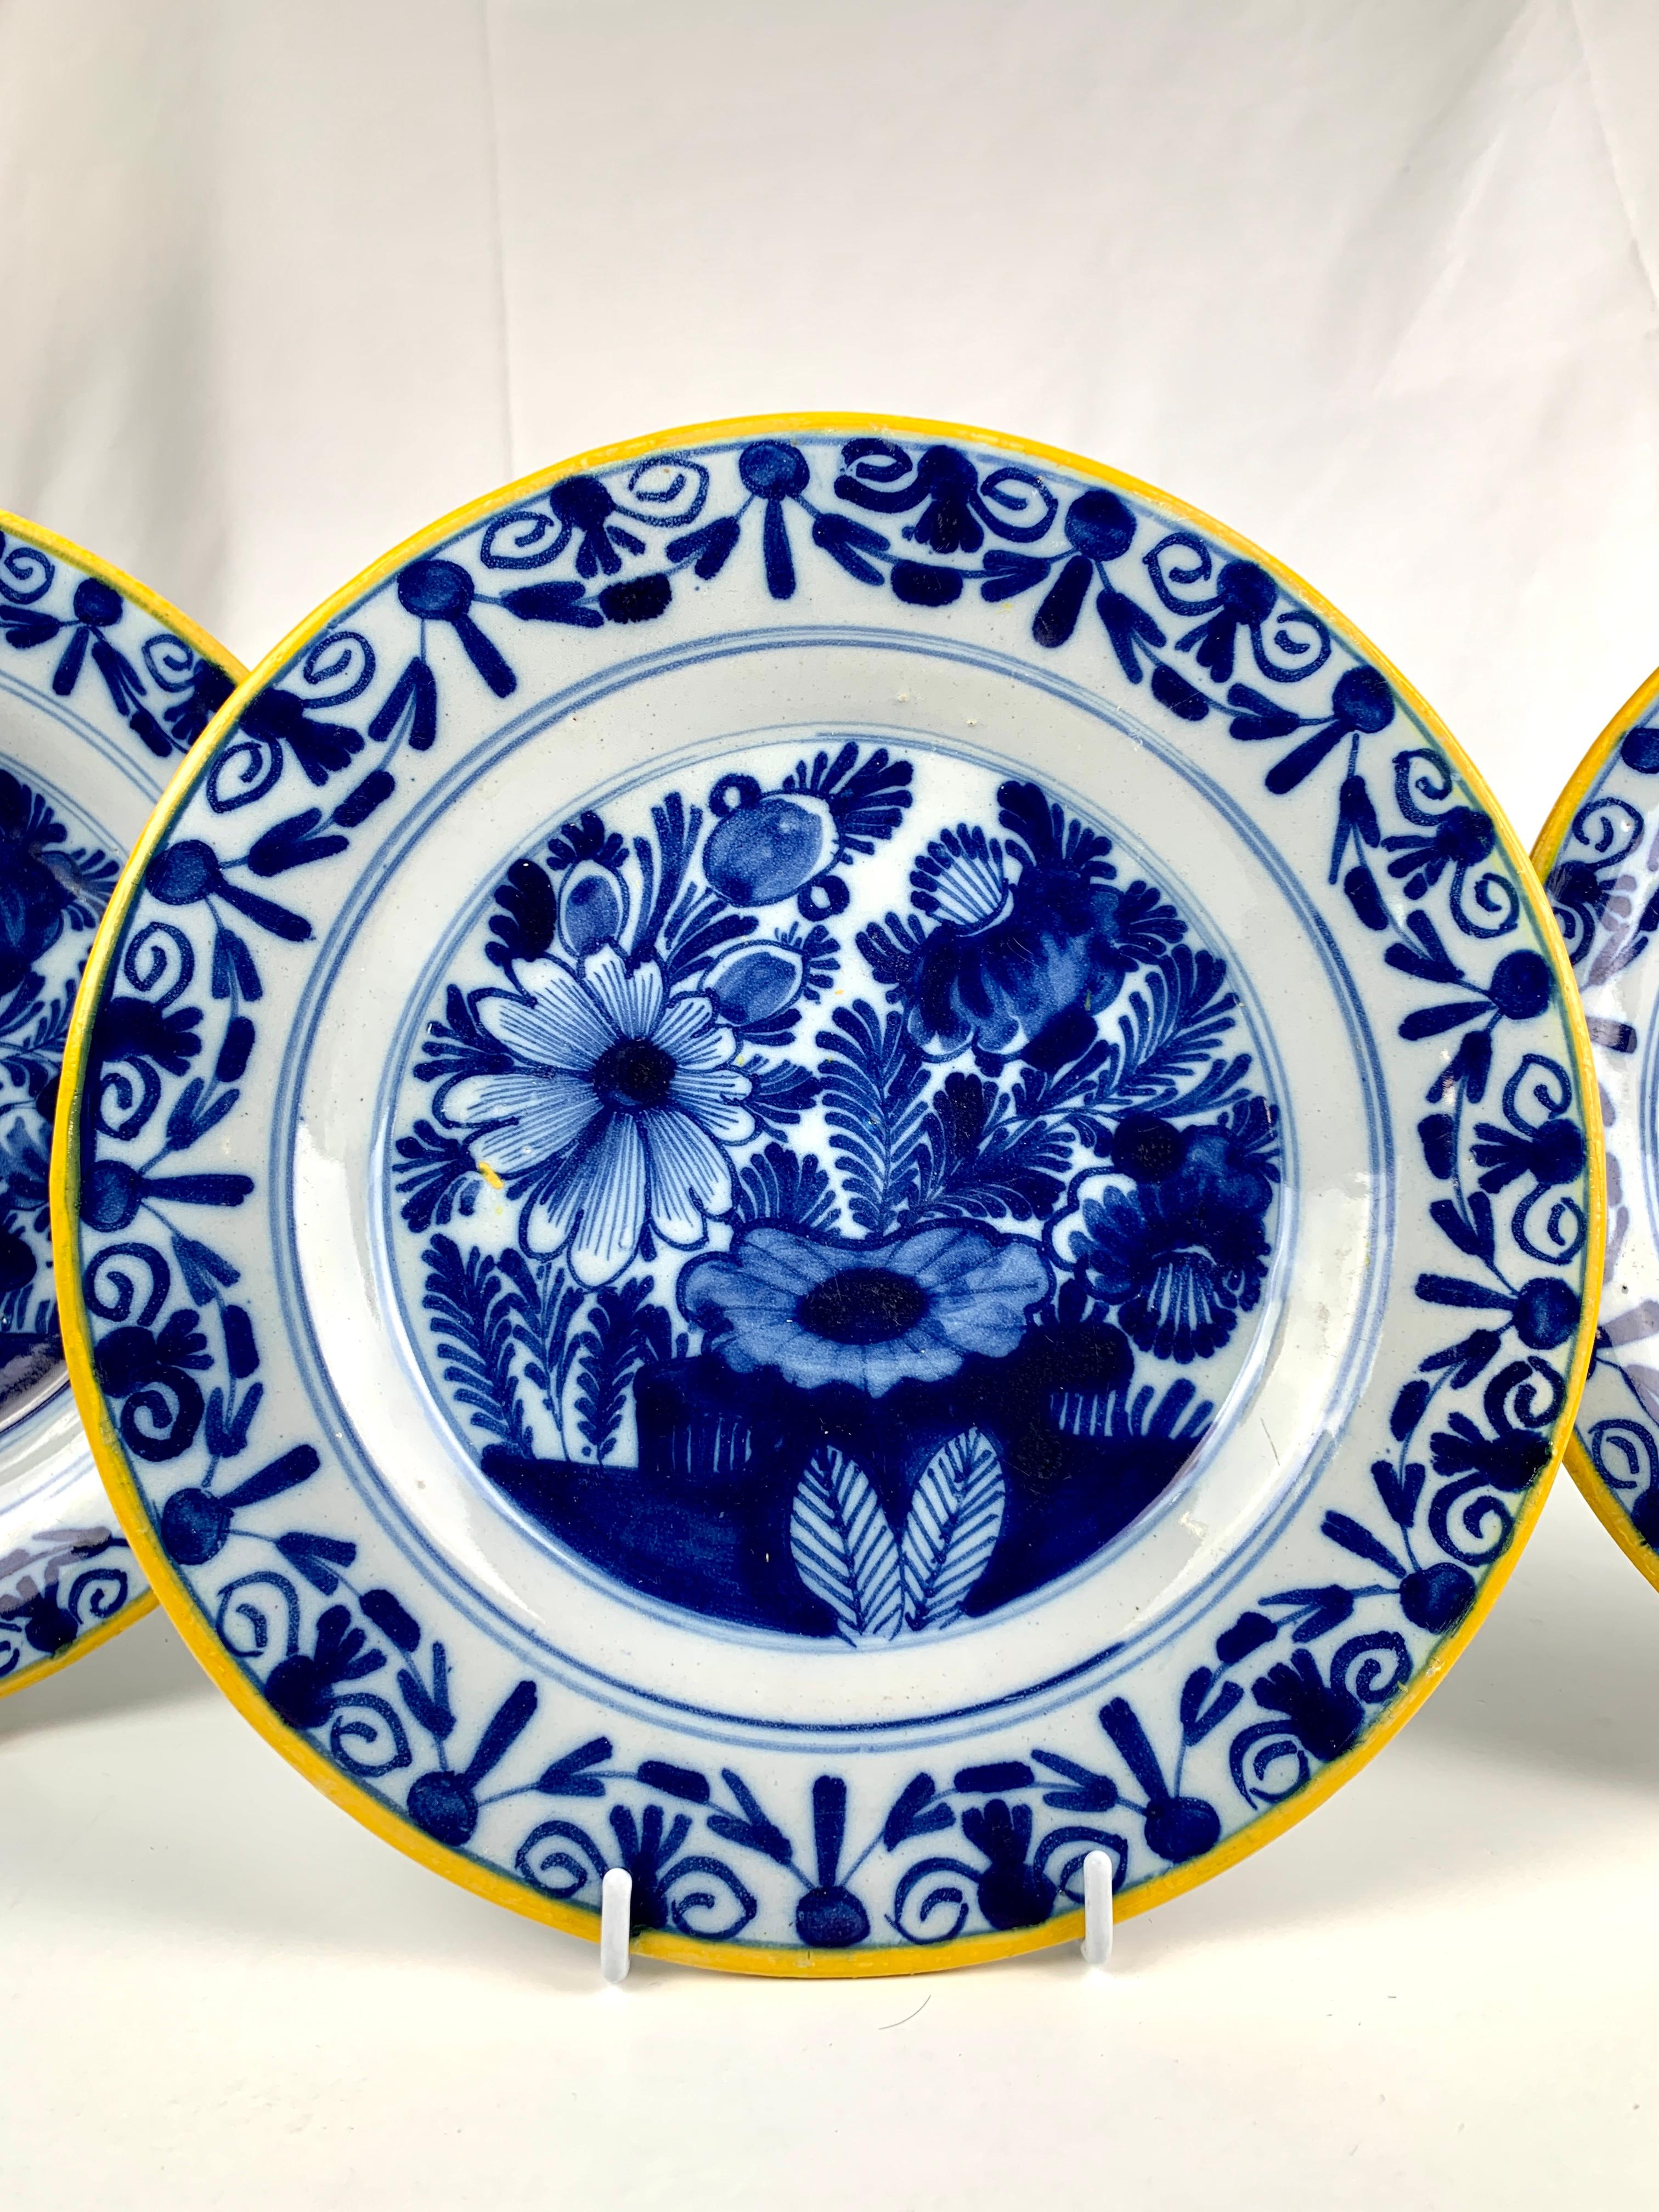 Dutch Three Blue and White Delft Plates Hand Painted 18th Century Netherlands